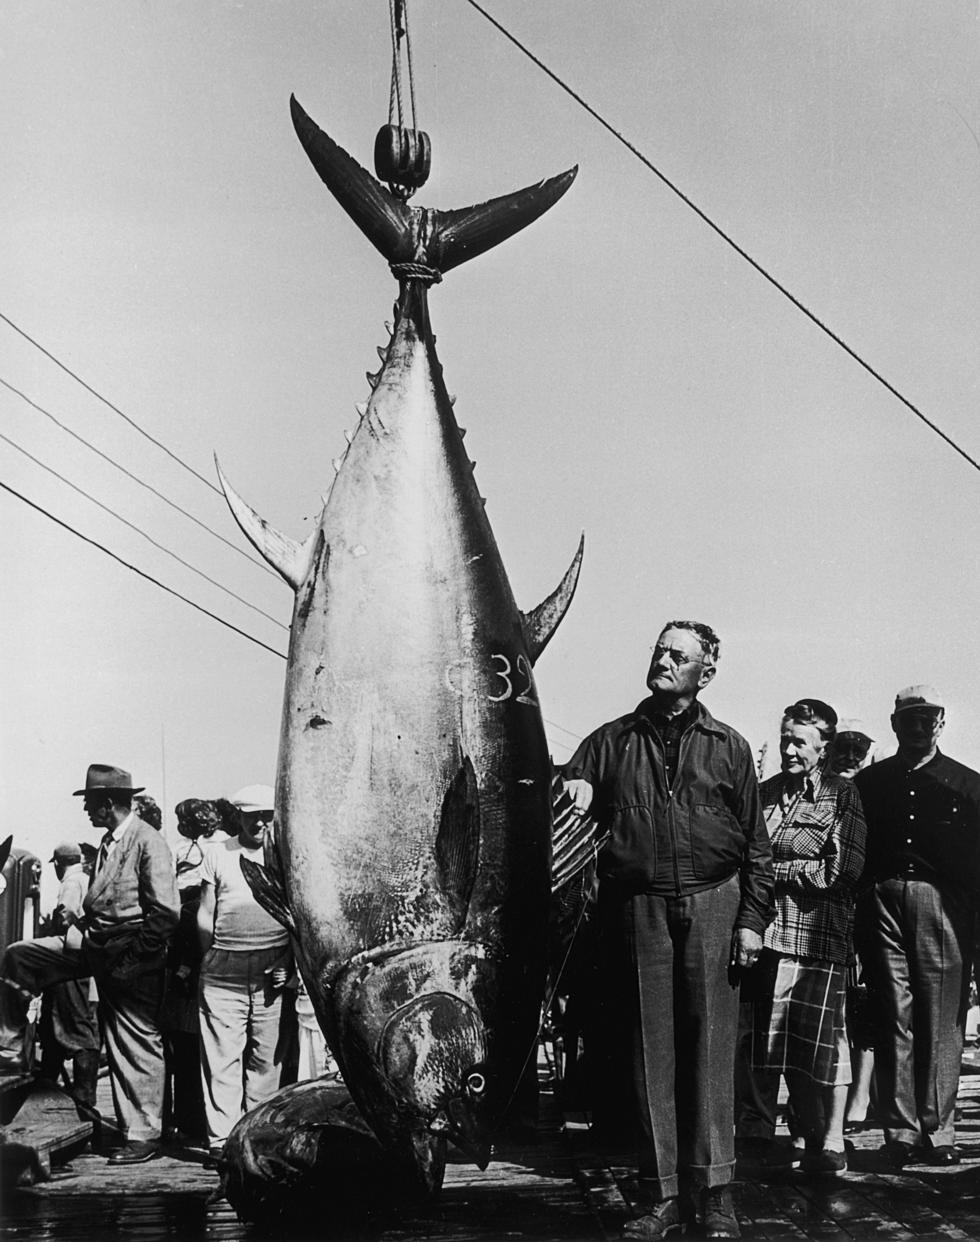 A New Zealand Man May Have Caught The World’s Biggest Tuna